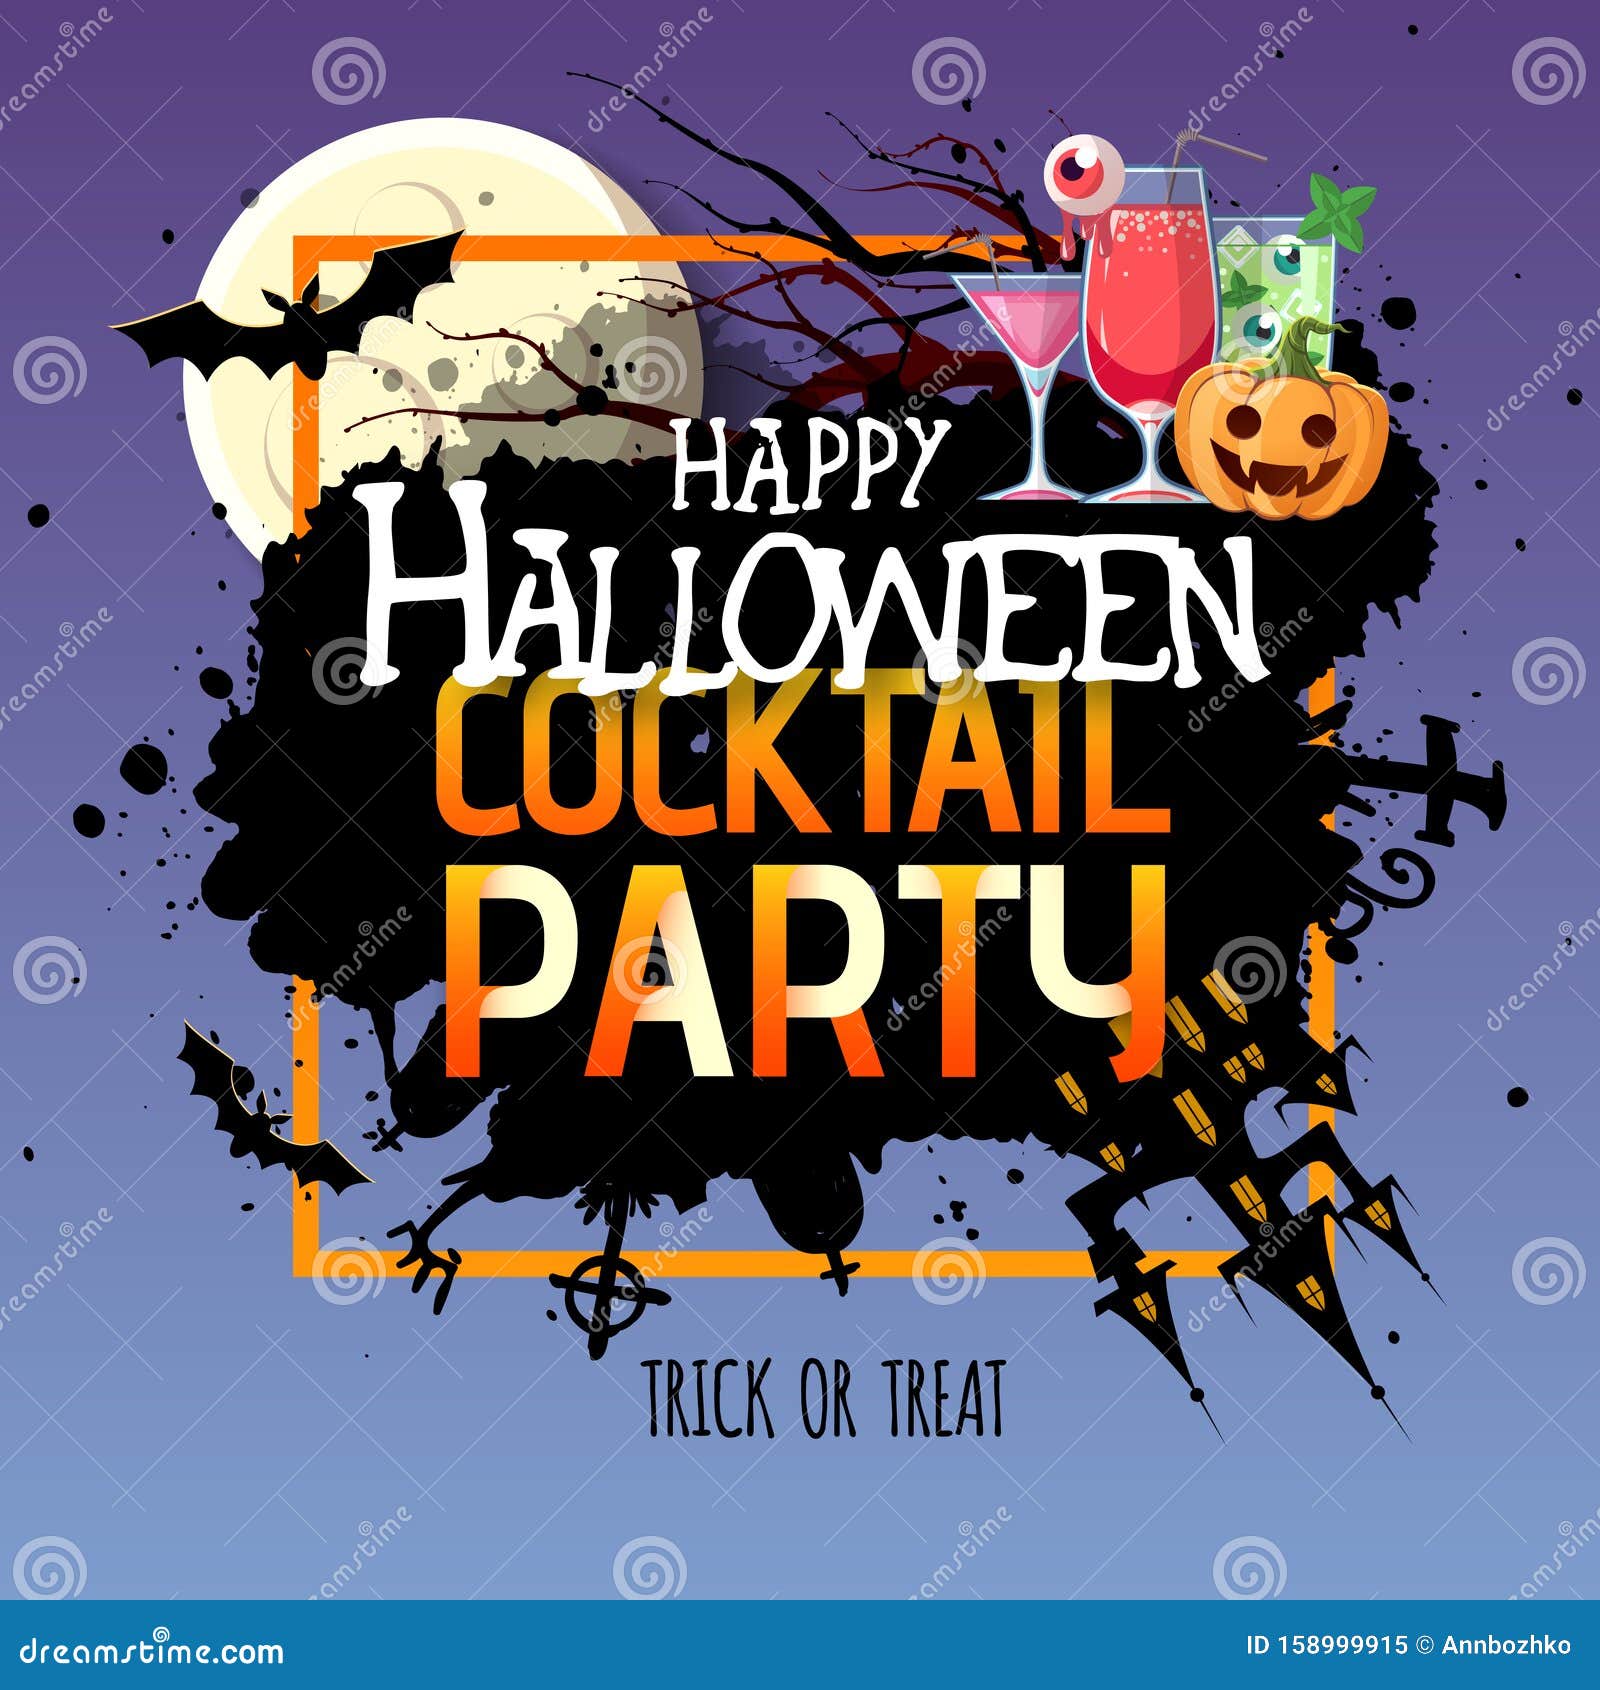 Halloween Cocktail Party Poster with Jack O Lantern Pumpkin and Full ...